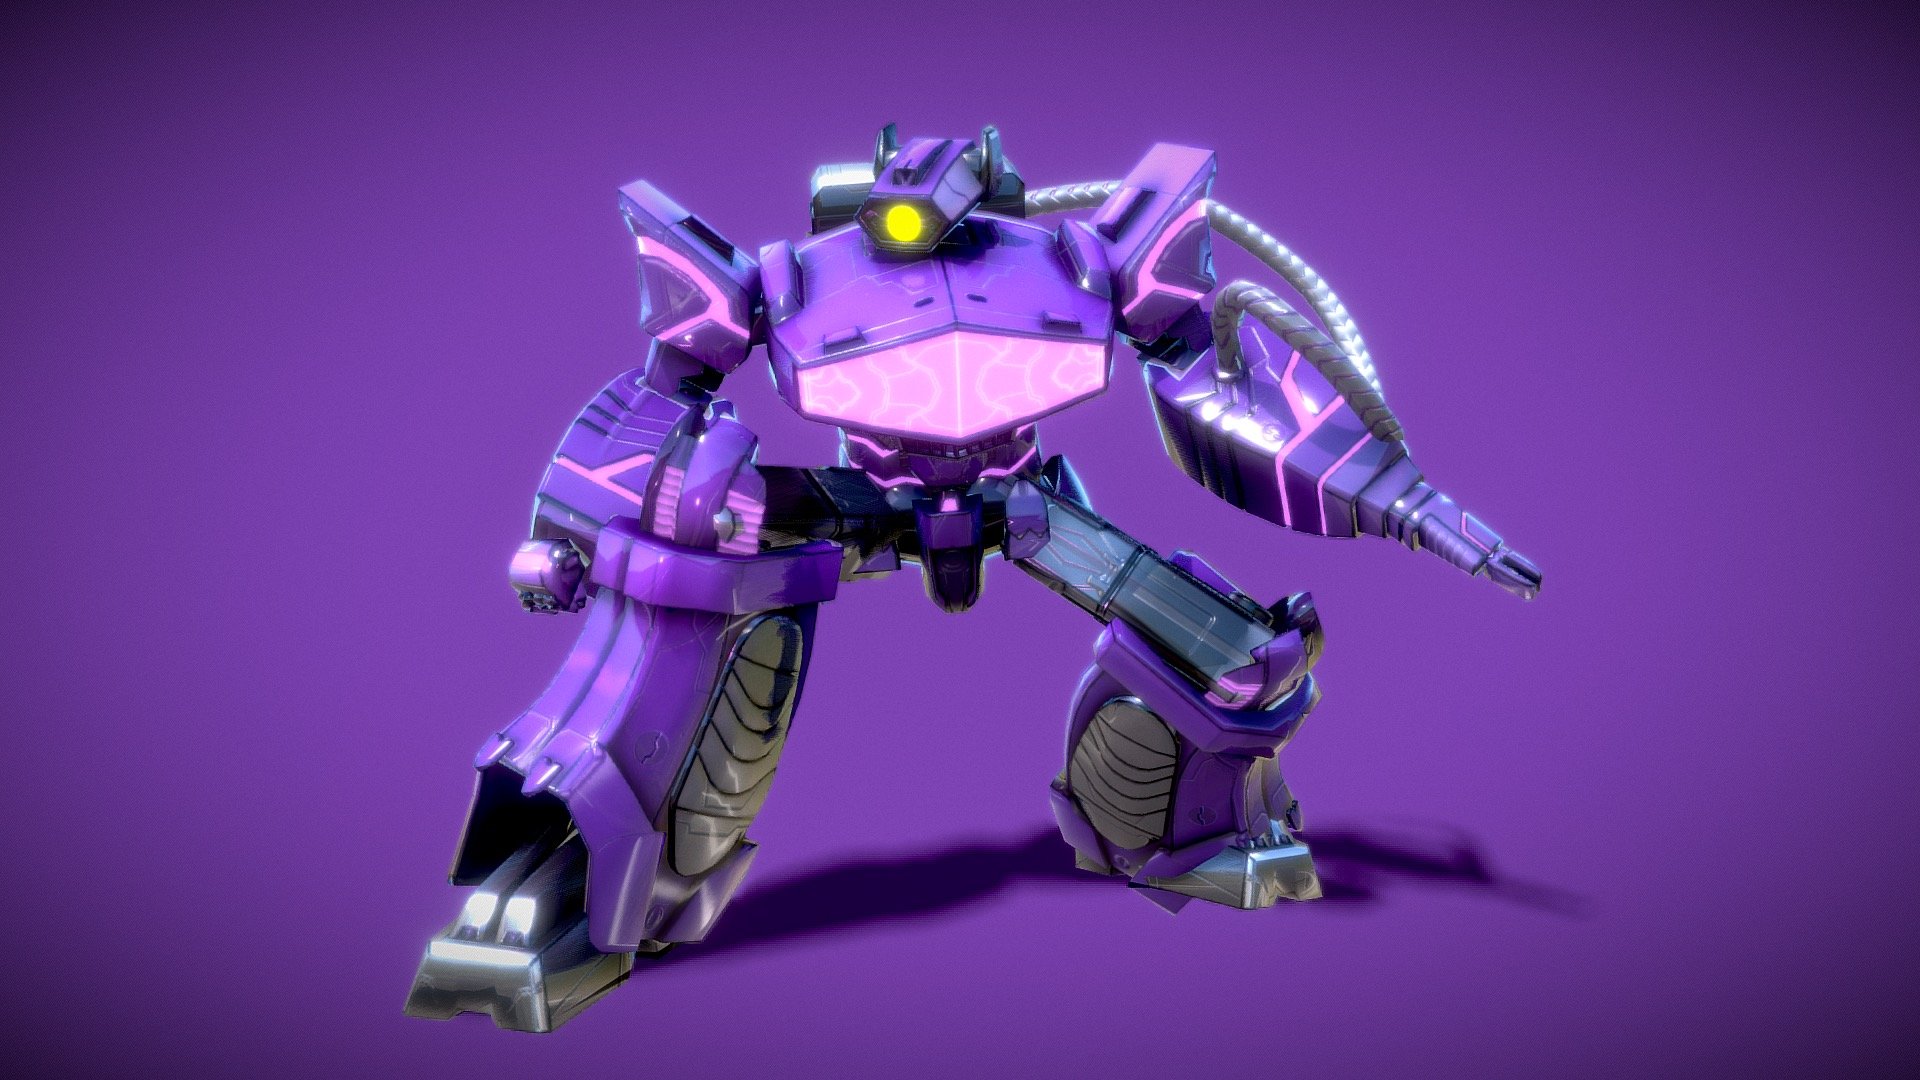 A fan artwork tribute to the iconic toon circa 80s
Shockwave is a cold, emotionless Decepticon that serves as Megatron’s “mad scientist”. Throughout his incarnations, he is usually distinguished by a laser cannon instead of one of his hands and his distinctive face, which is featureless save for a single robotic eye 3d model